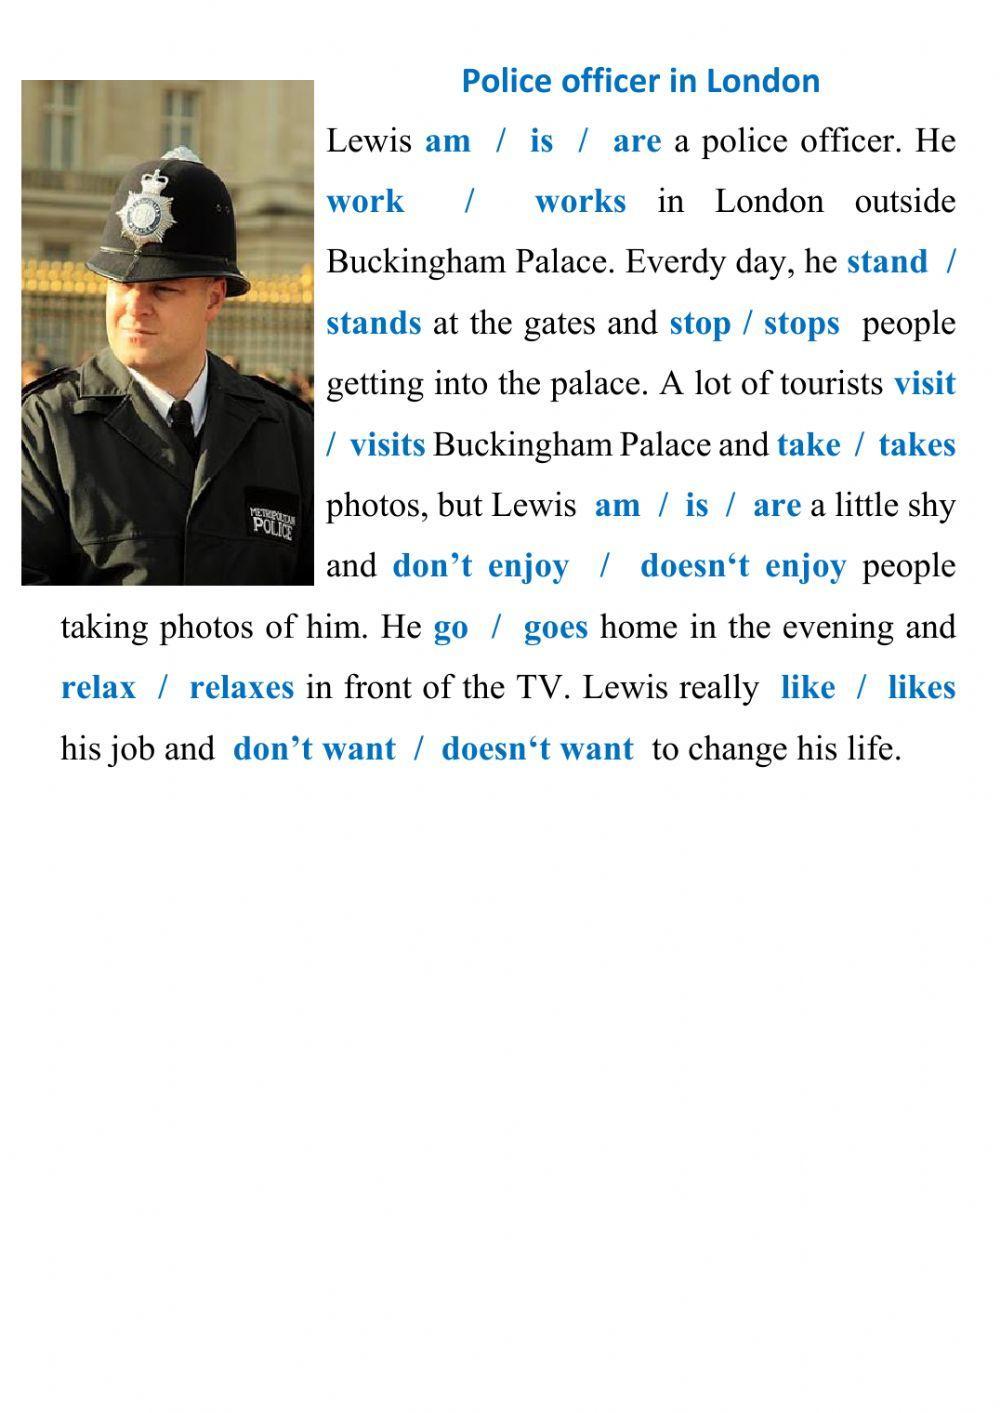 Reading - police officer in London